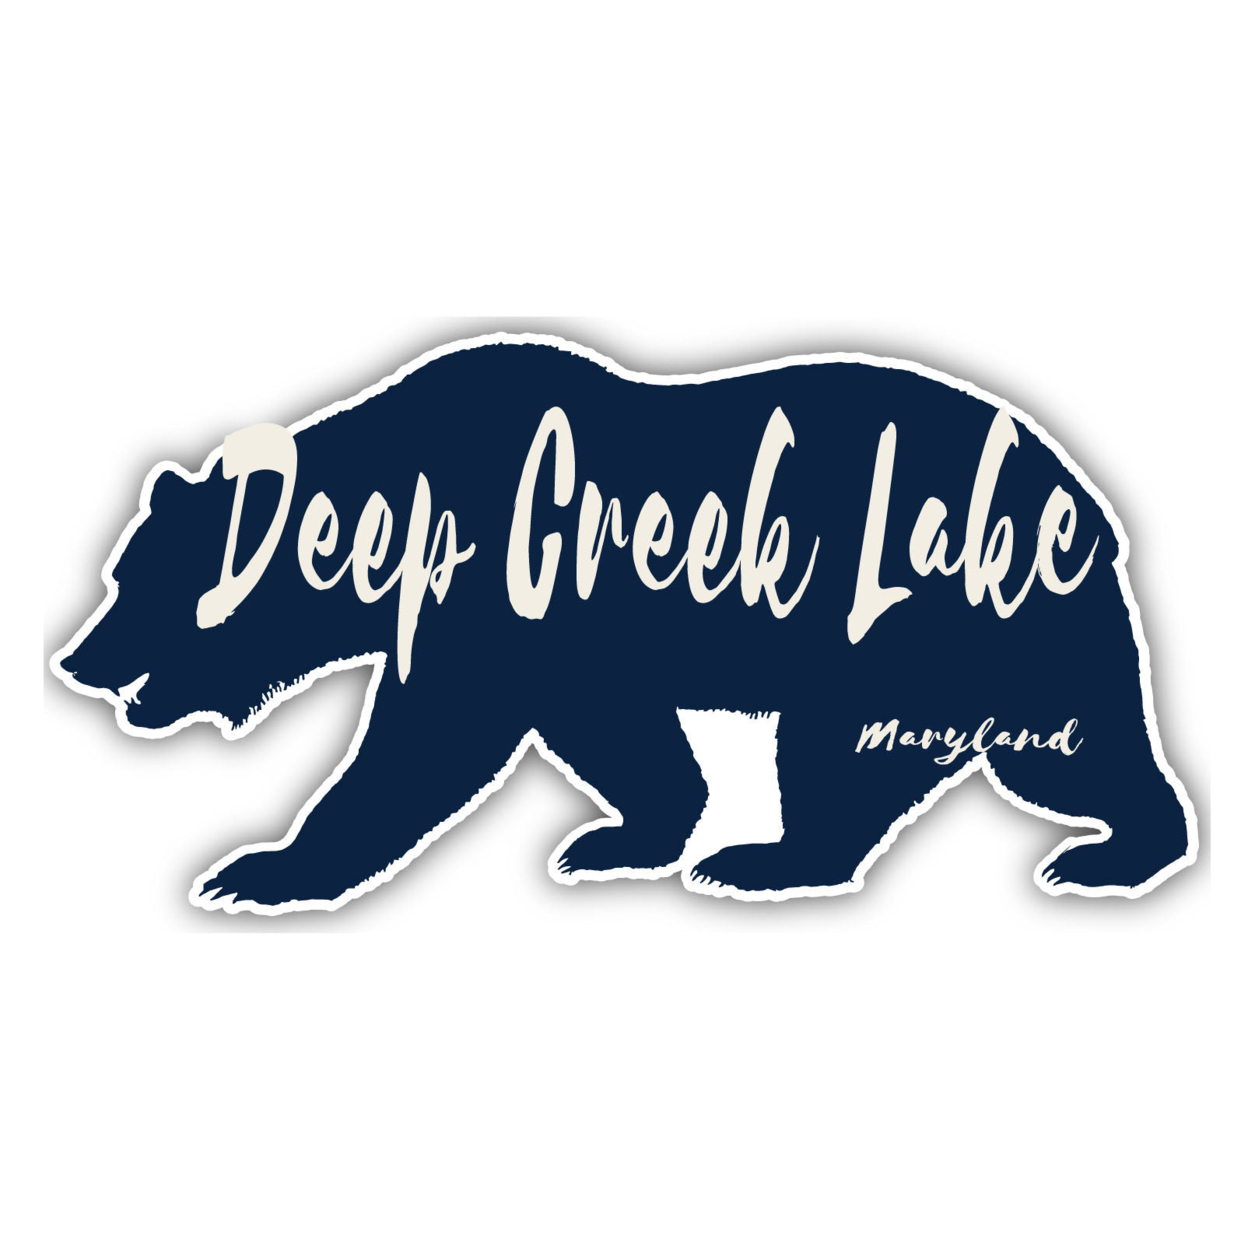 Deep Creek Lake Maryland Souvenir Decorative Stickers (Choose Theme And Size) - 4-Pack, 8-Inch, Bear